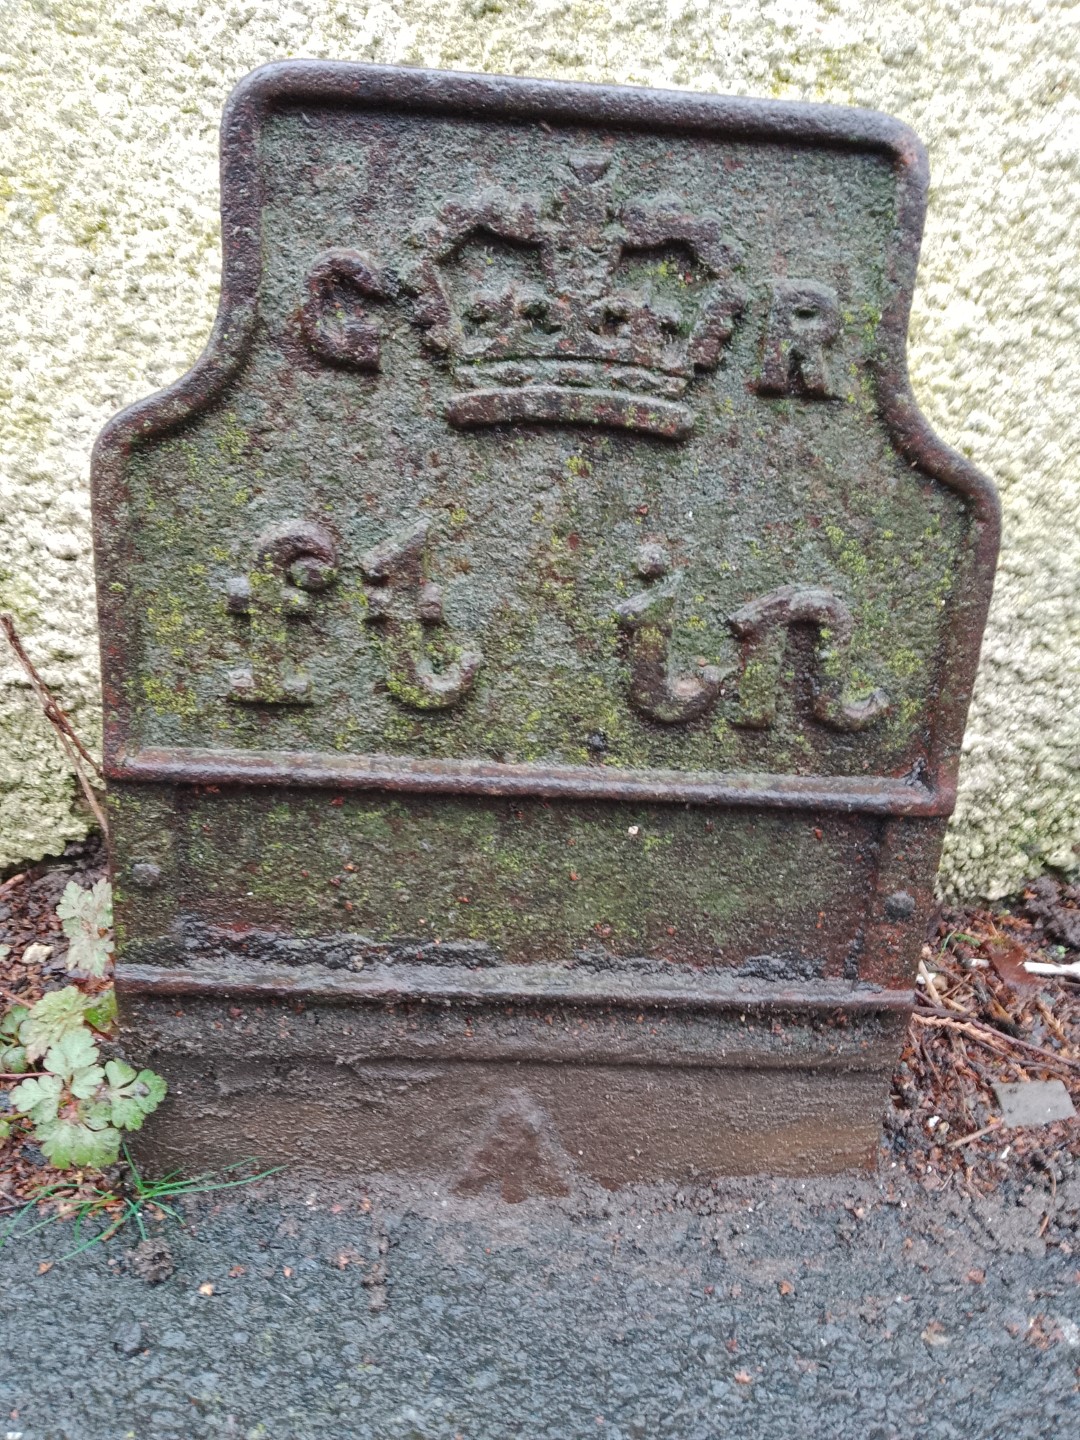 Telegraph cable marker post at 10m S of jnc. Ivor Road, Mount Pleasant, Redditch by Pamela Howard 